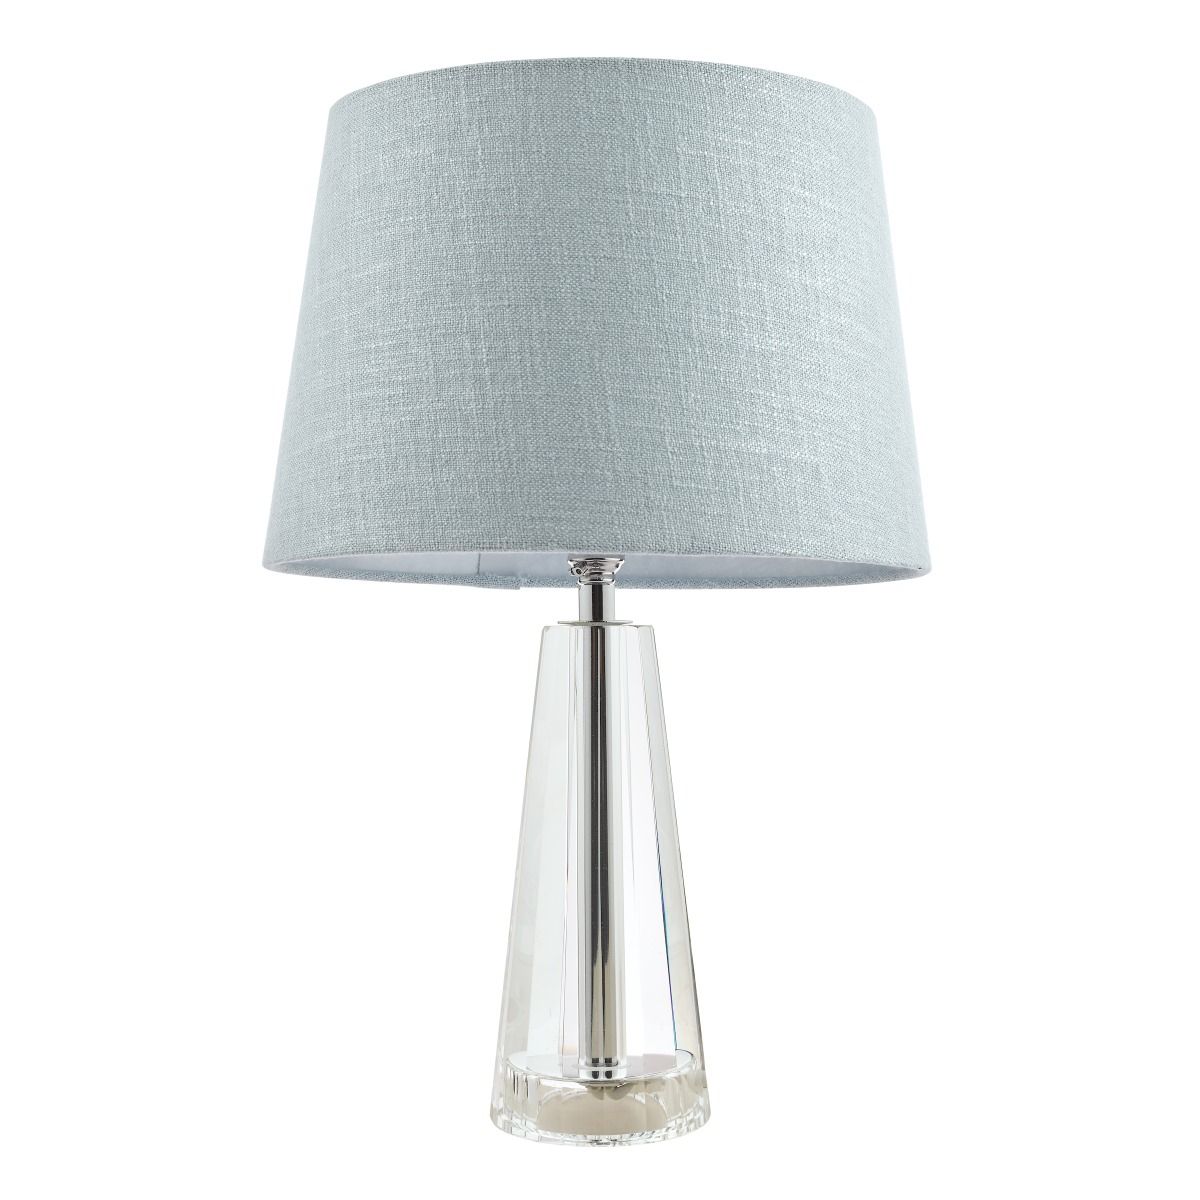 Crystal Table Lamps | Lights4Living